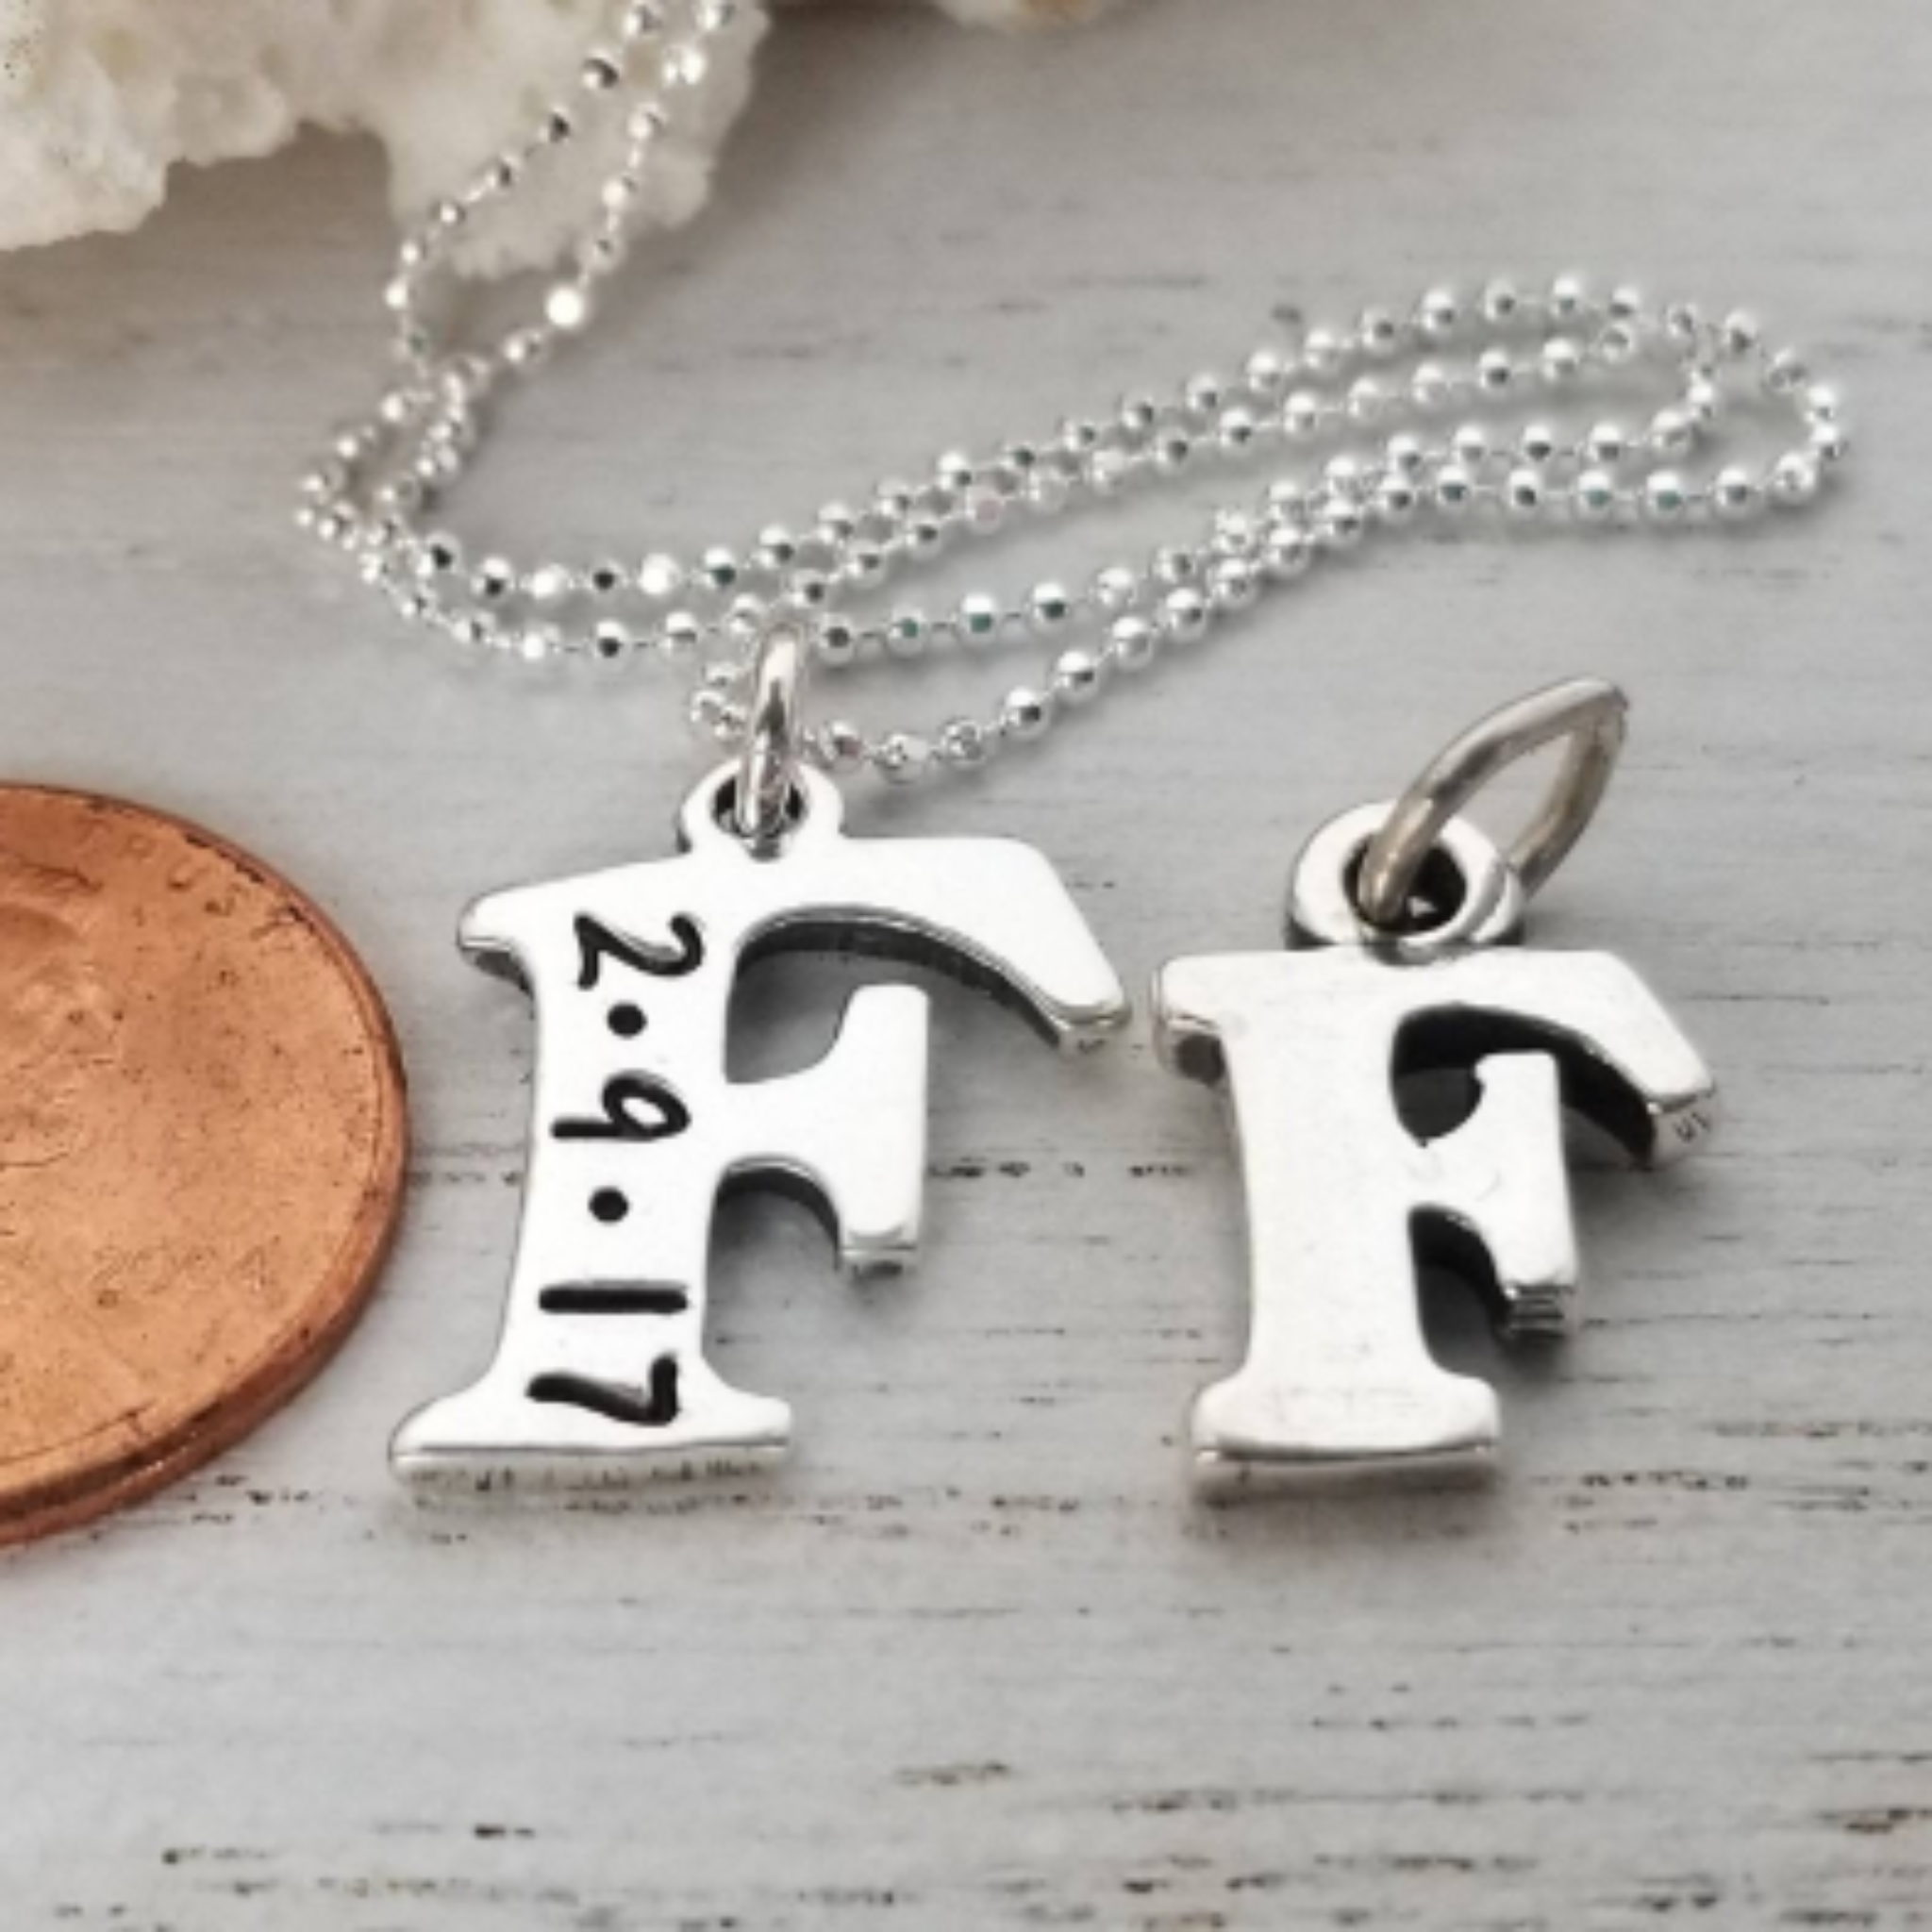 Sterling Silver Birth Date Initial Necklace